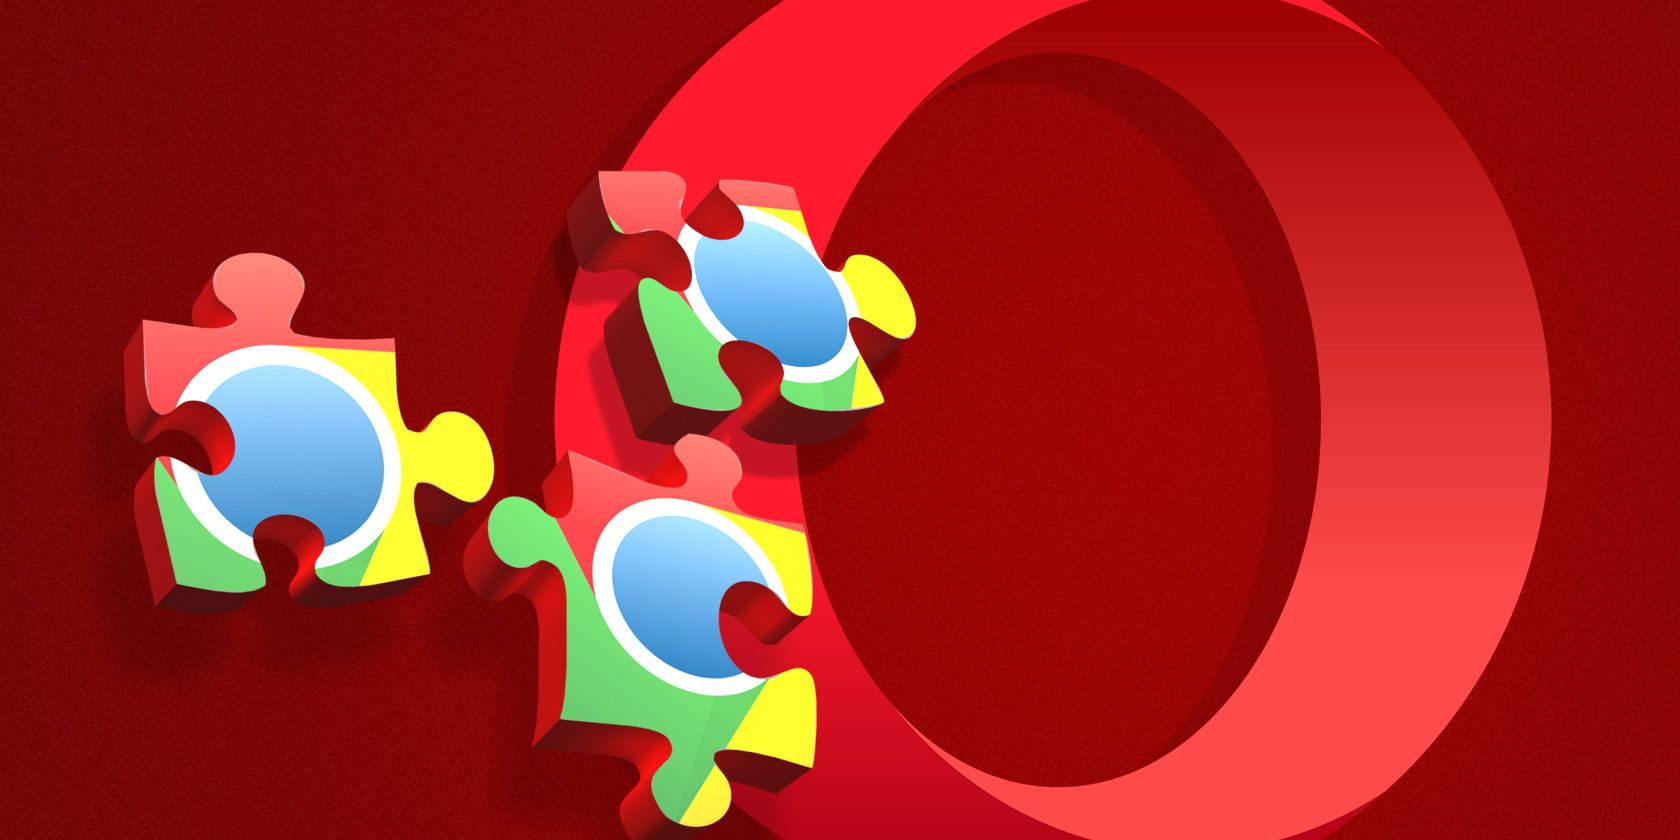 How to Install Chrome Extensions in Opera 